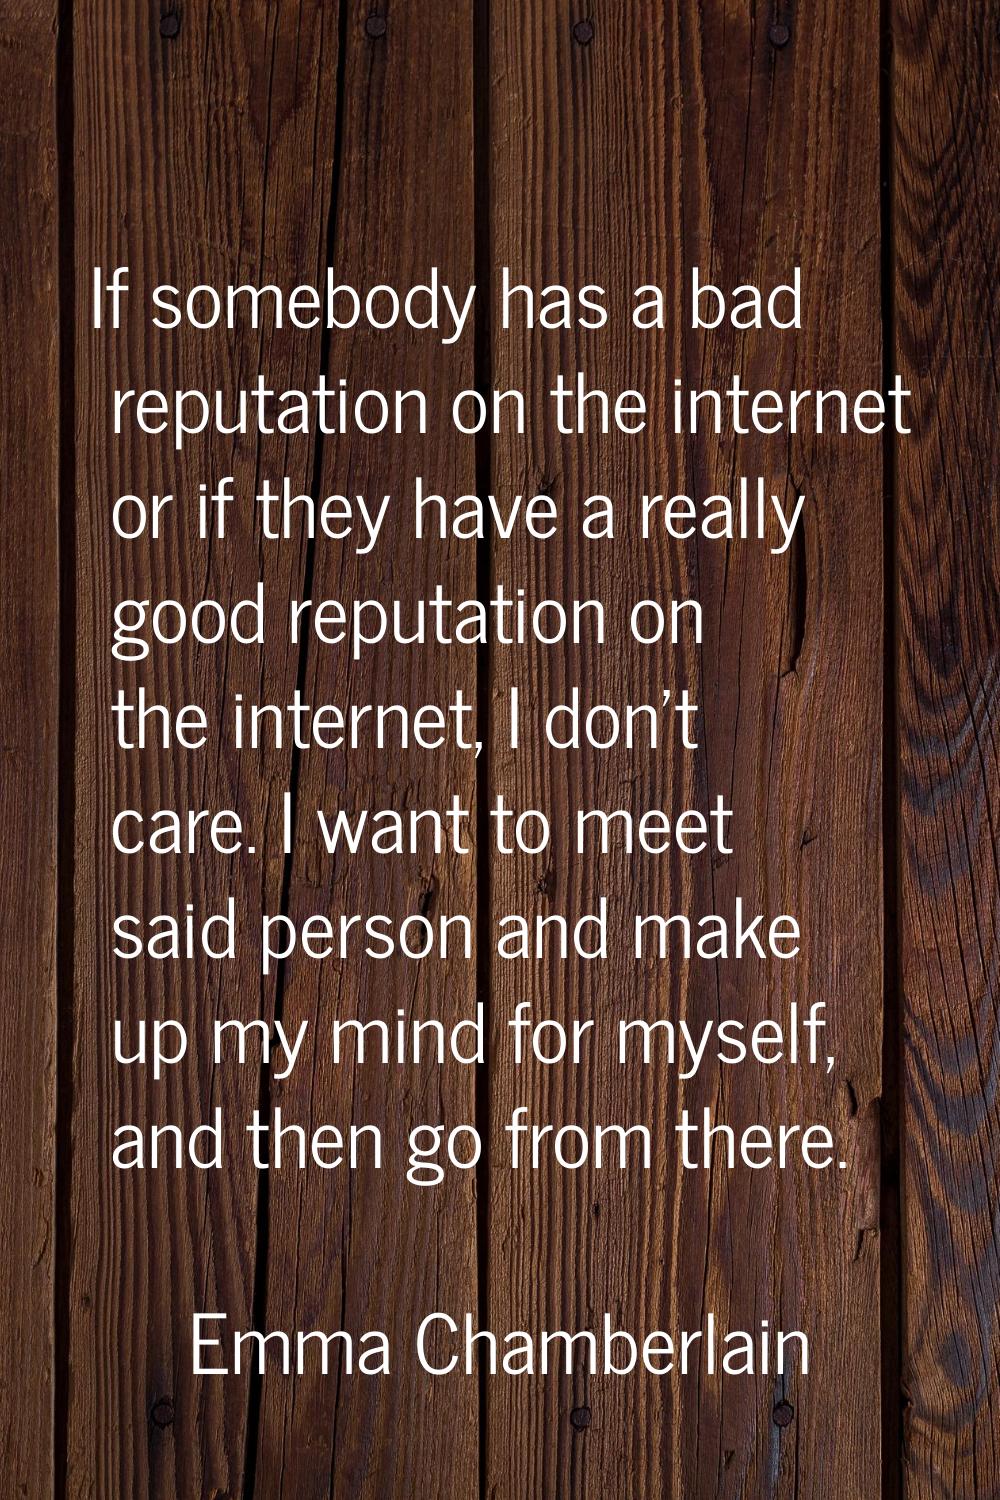 If somebody has a bad reputation on the internet or if they have a really good reputation on the in